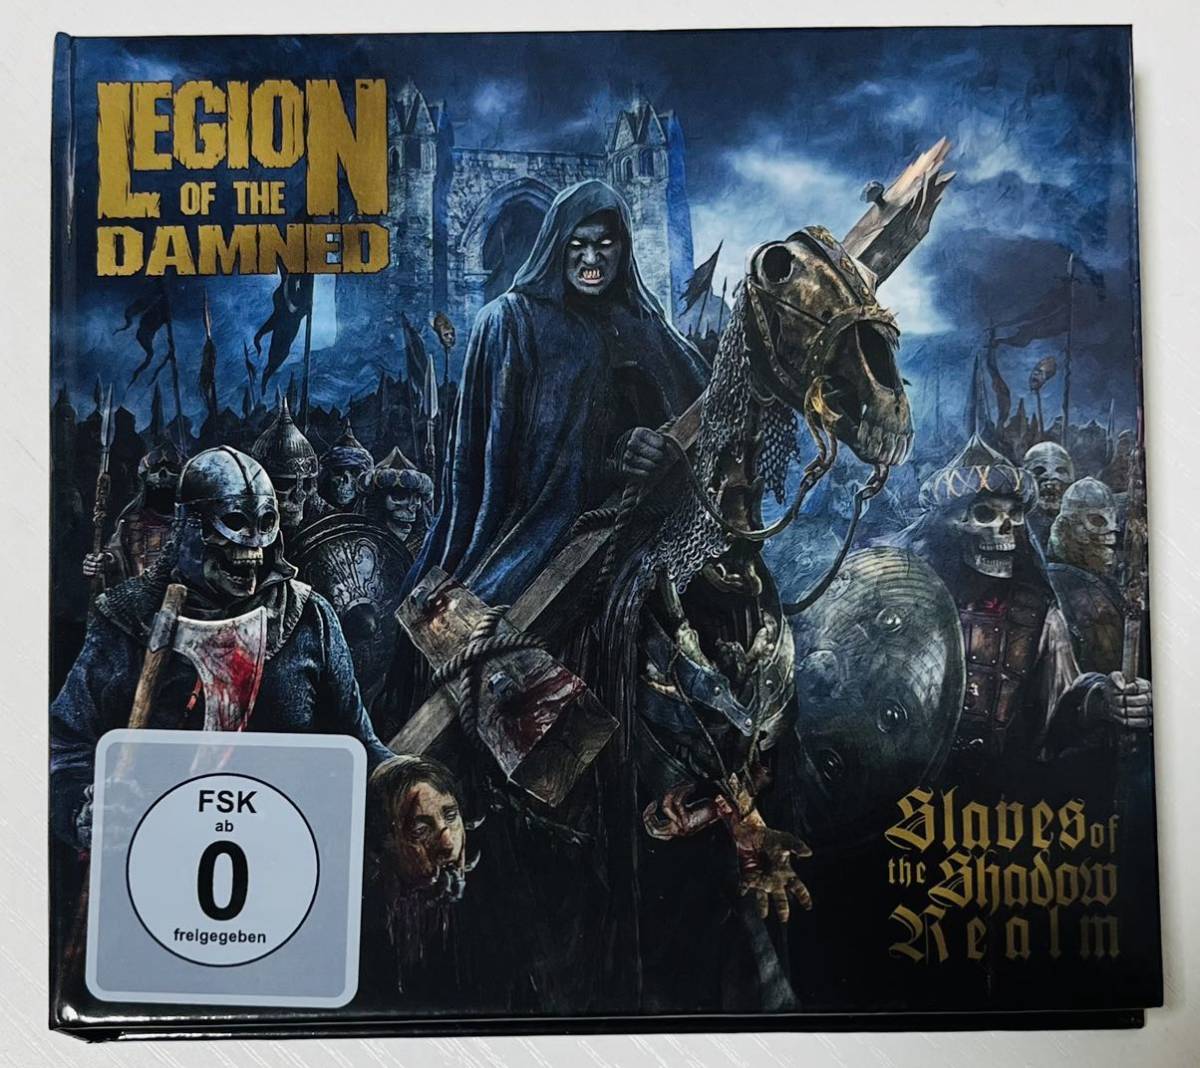 ■ LEGION OF THE DAMNED「 SLAVES OF THE SHADOW REALM 」輸入盤デジブック仕様 CD+DVD 2枚組の画像1